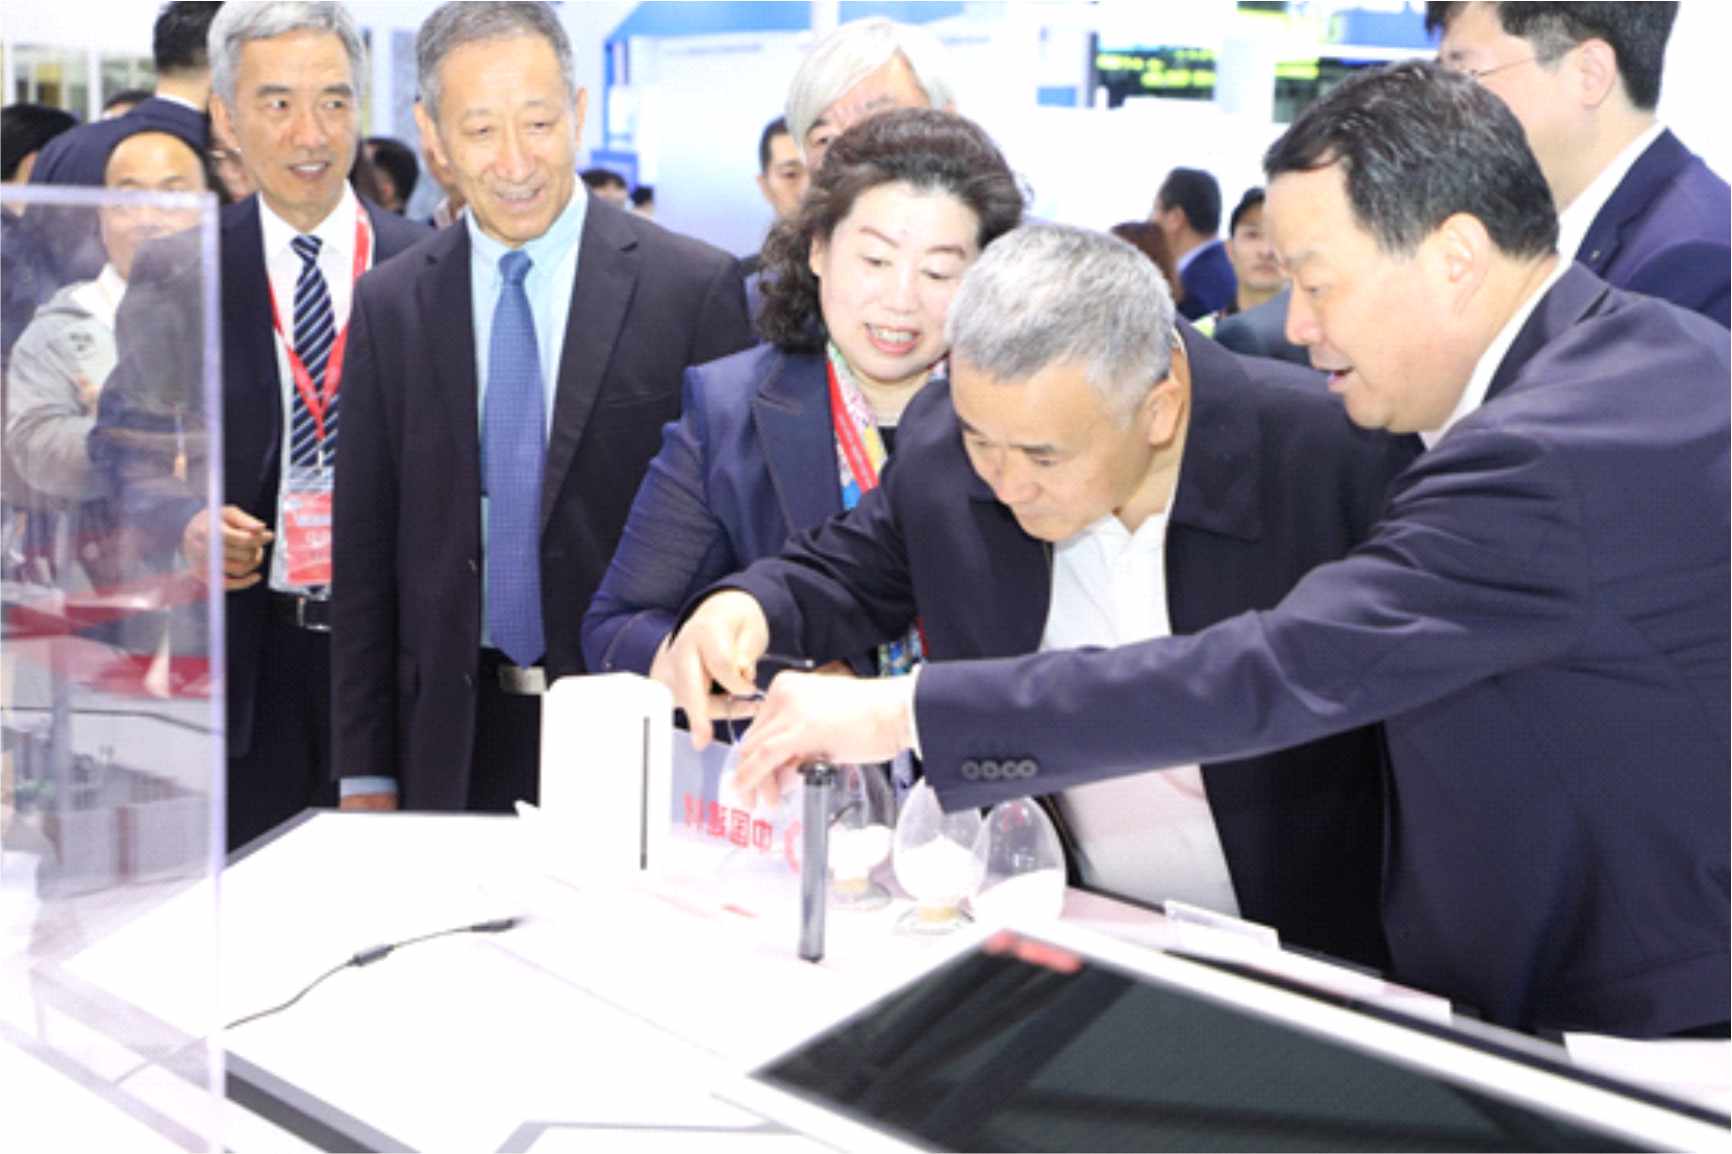 Post-show Report - The 33rd China International Glass Industrial Technical Exhibition Successfully held